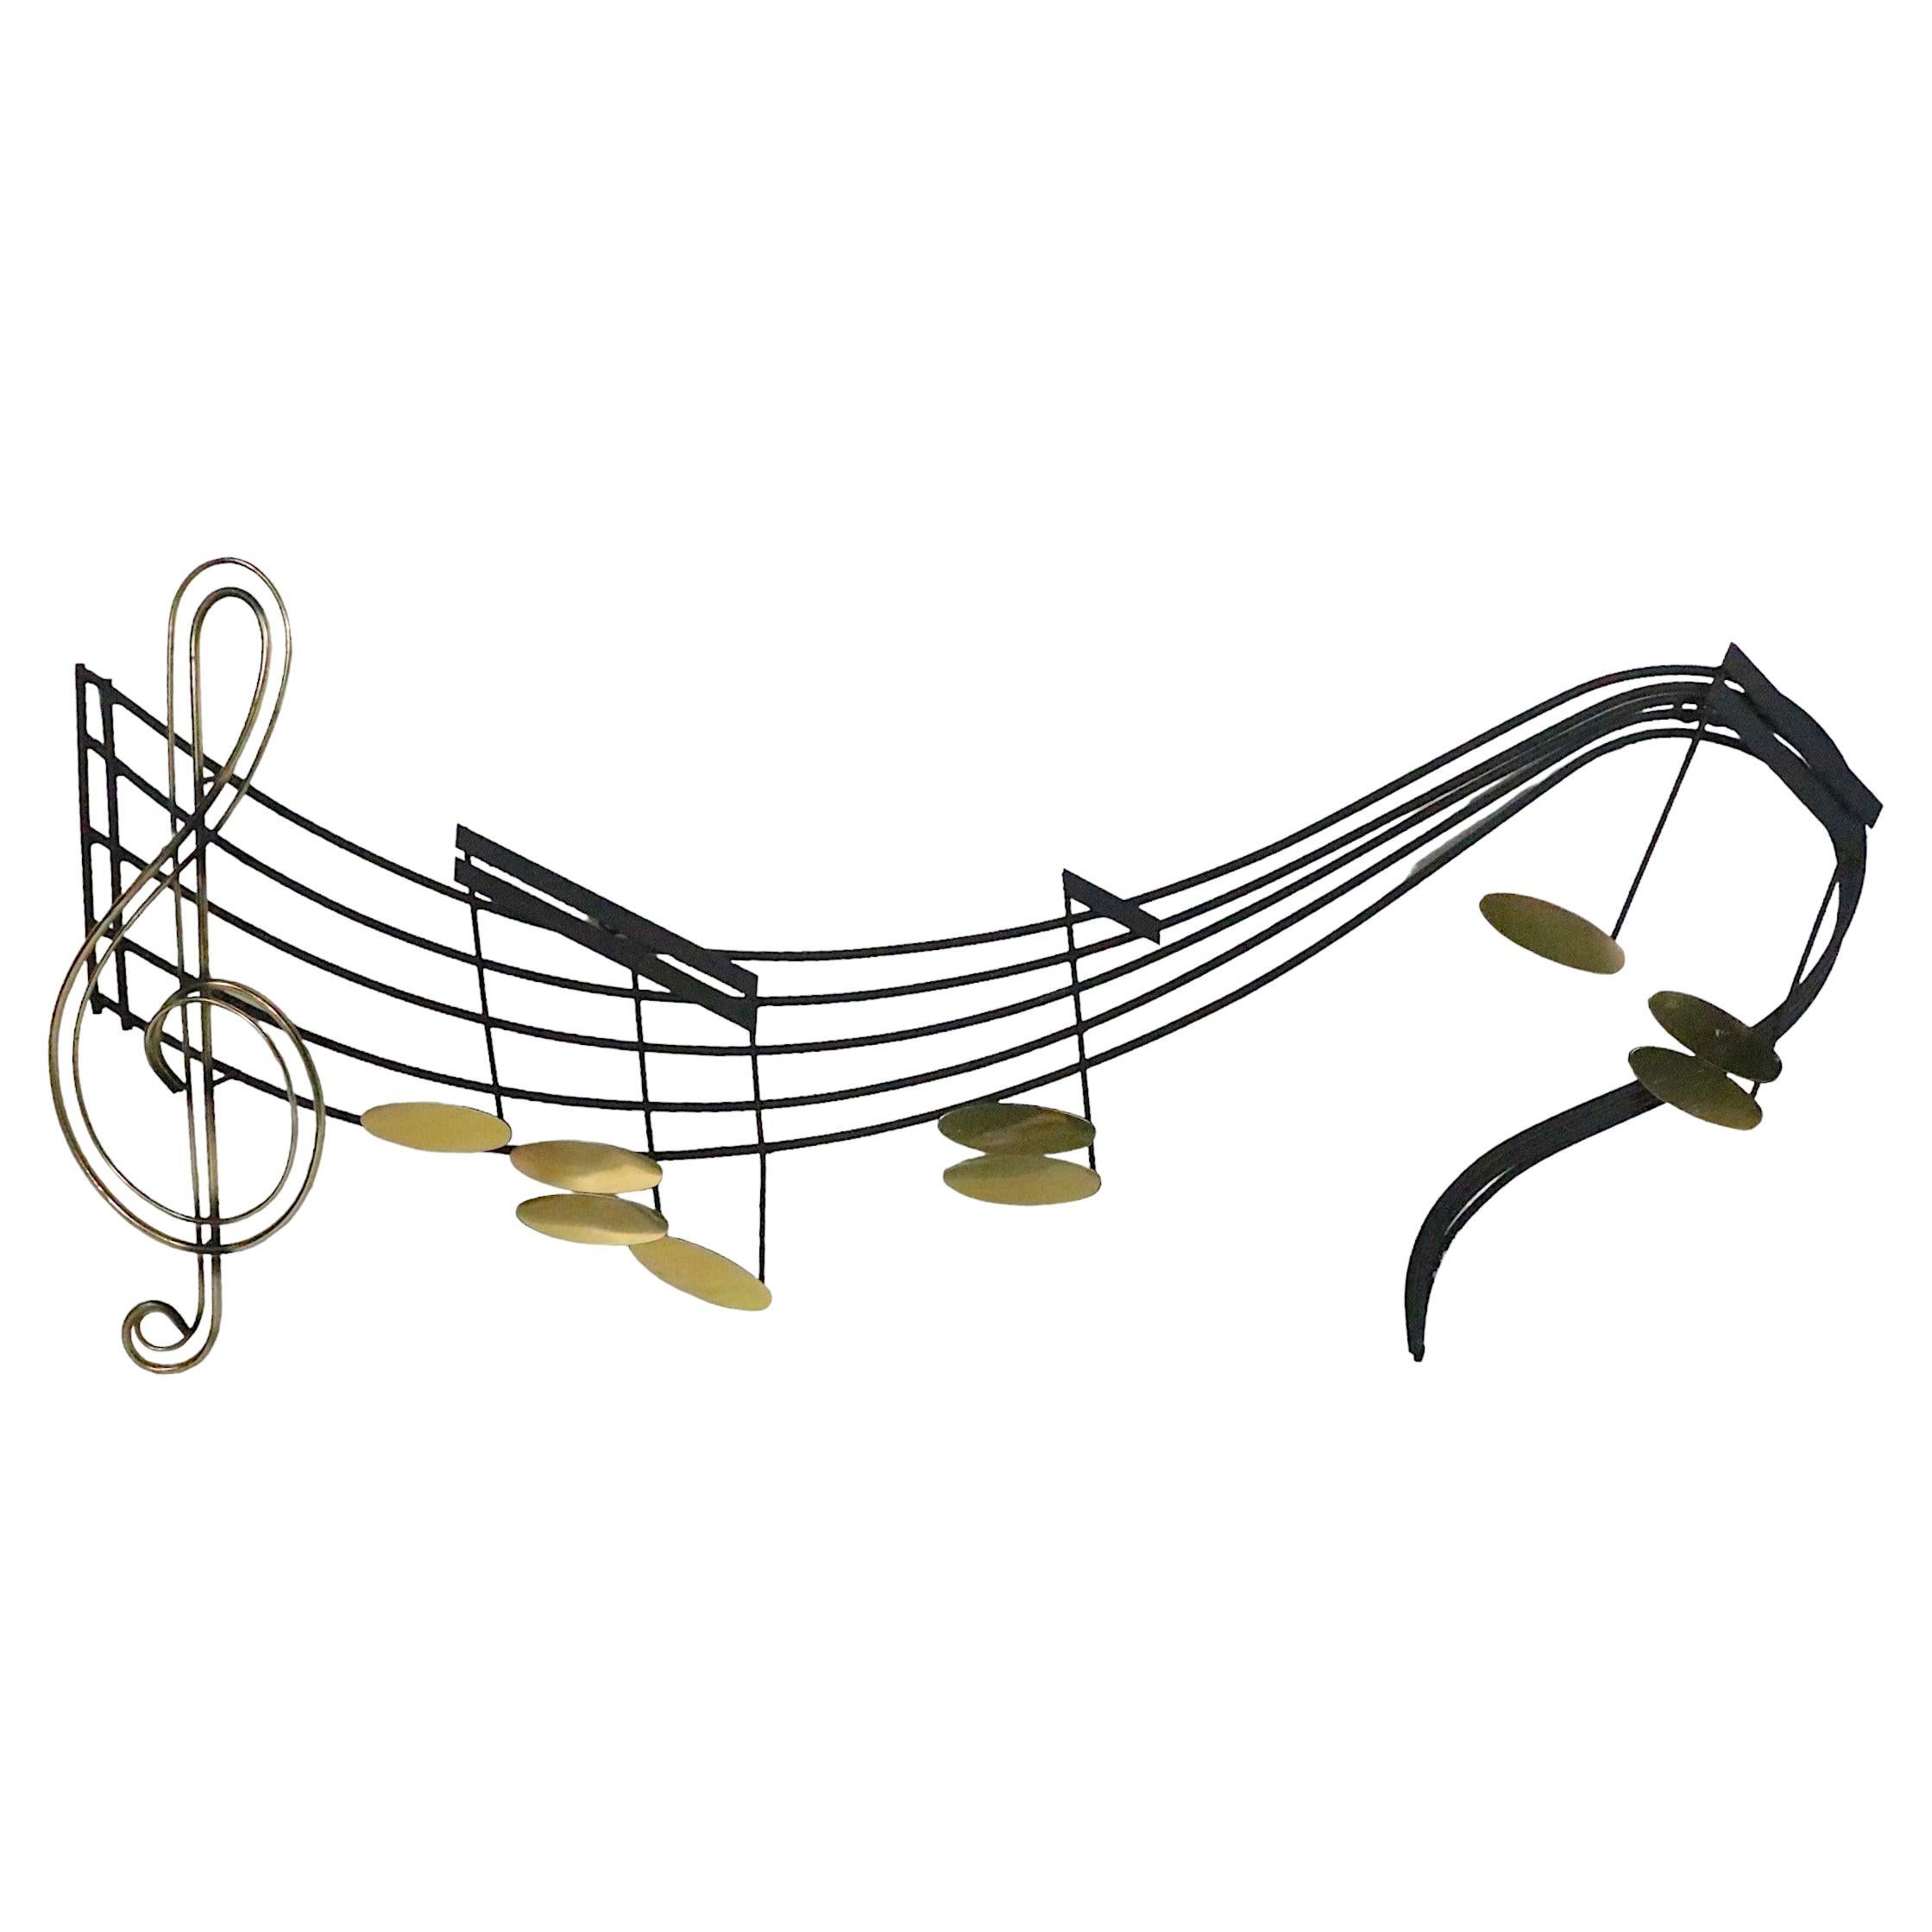 Musical Note Wall Sculpture by Jere Artisan House C 1990s For Sale